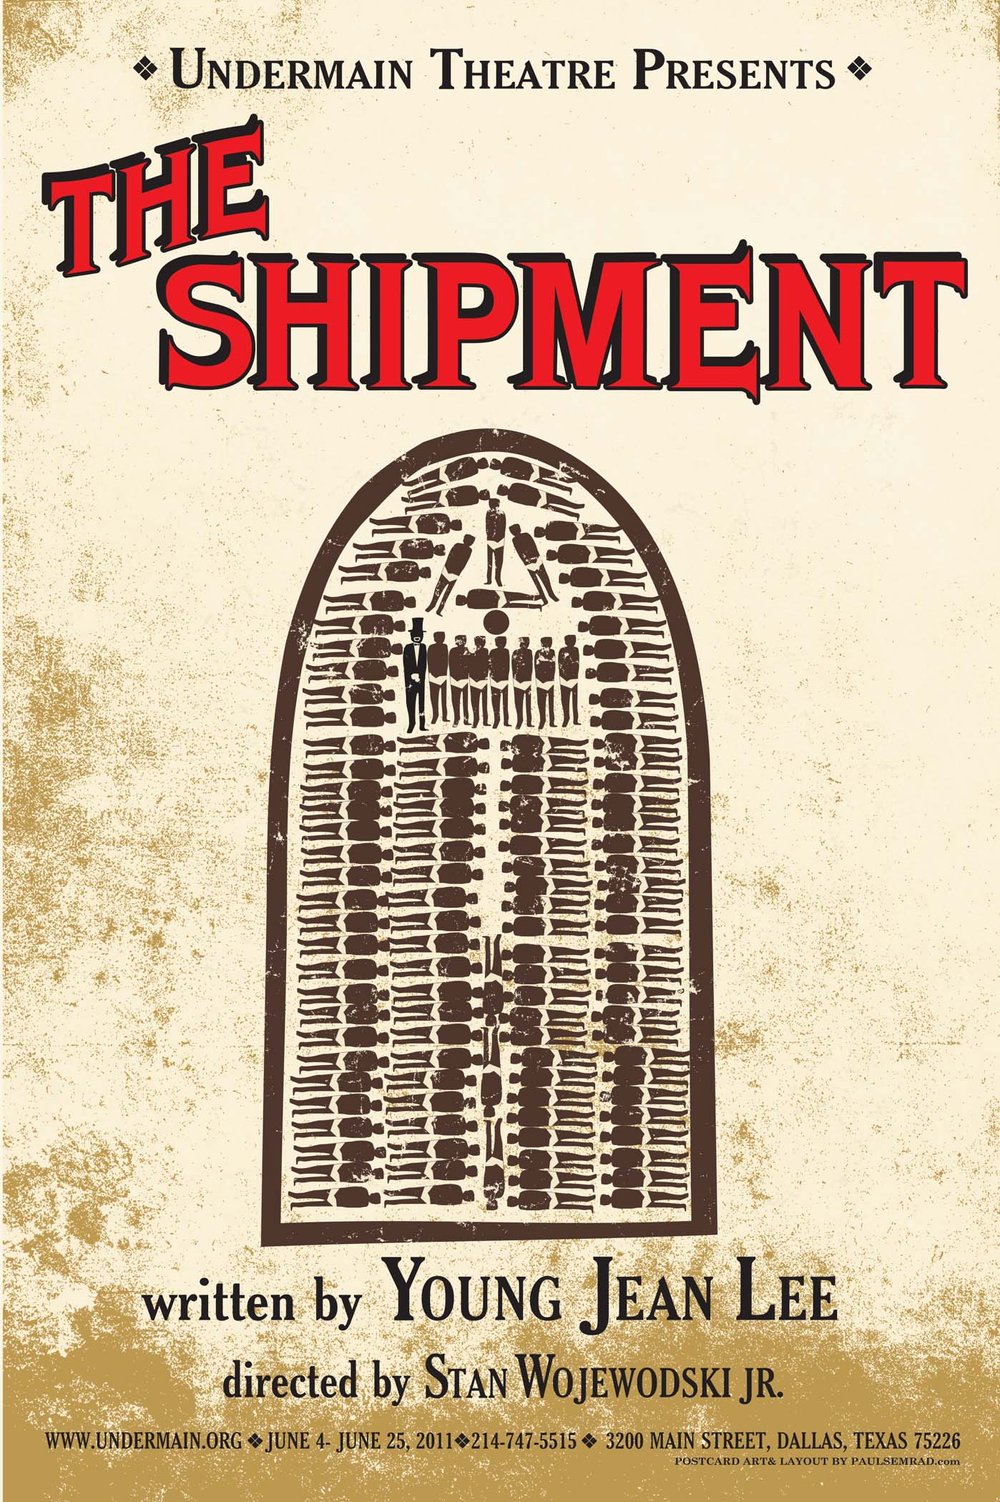 UNDERMAIN THEATRE ARCHIVE: The Shipment by Young Jean Lee, 2011